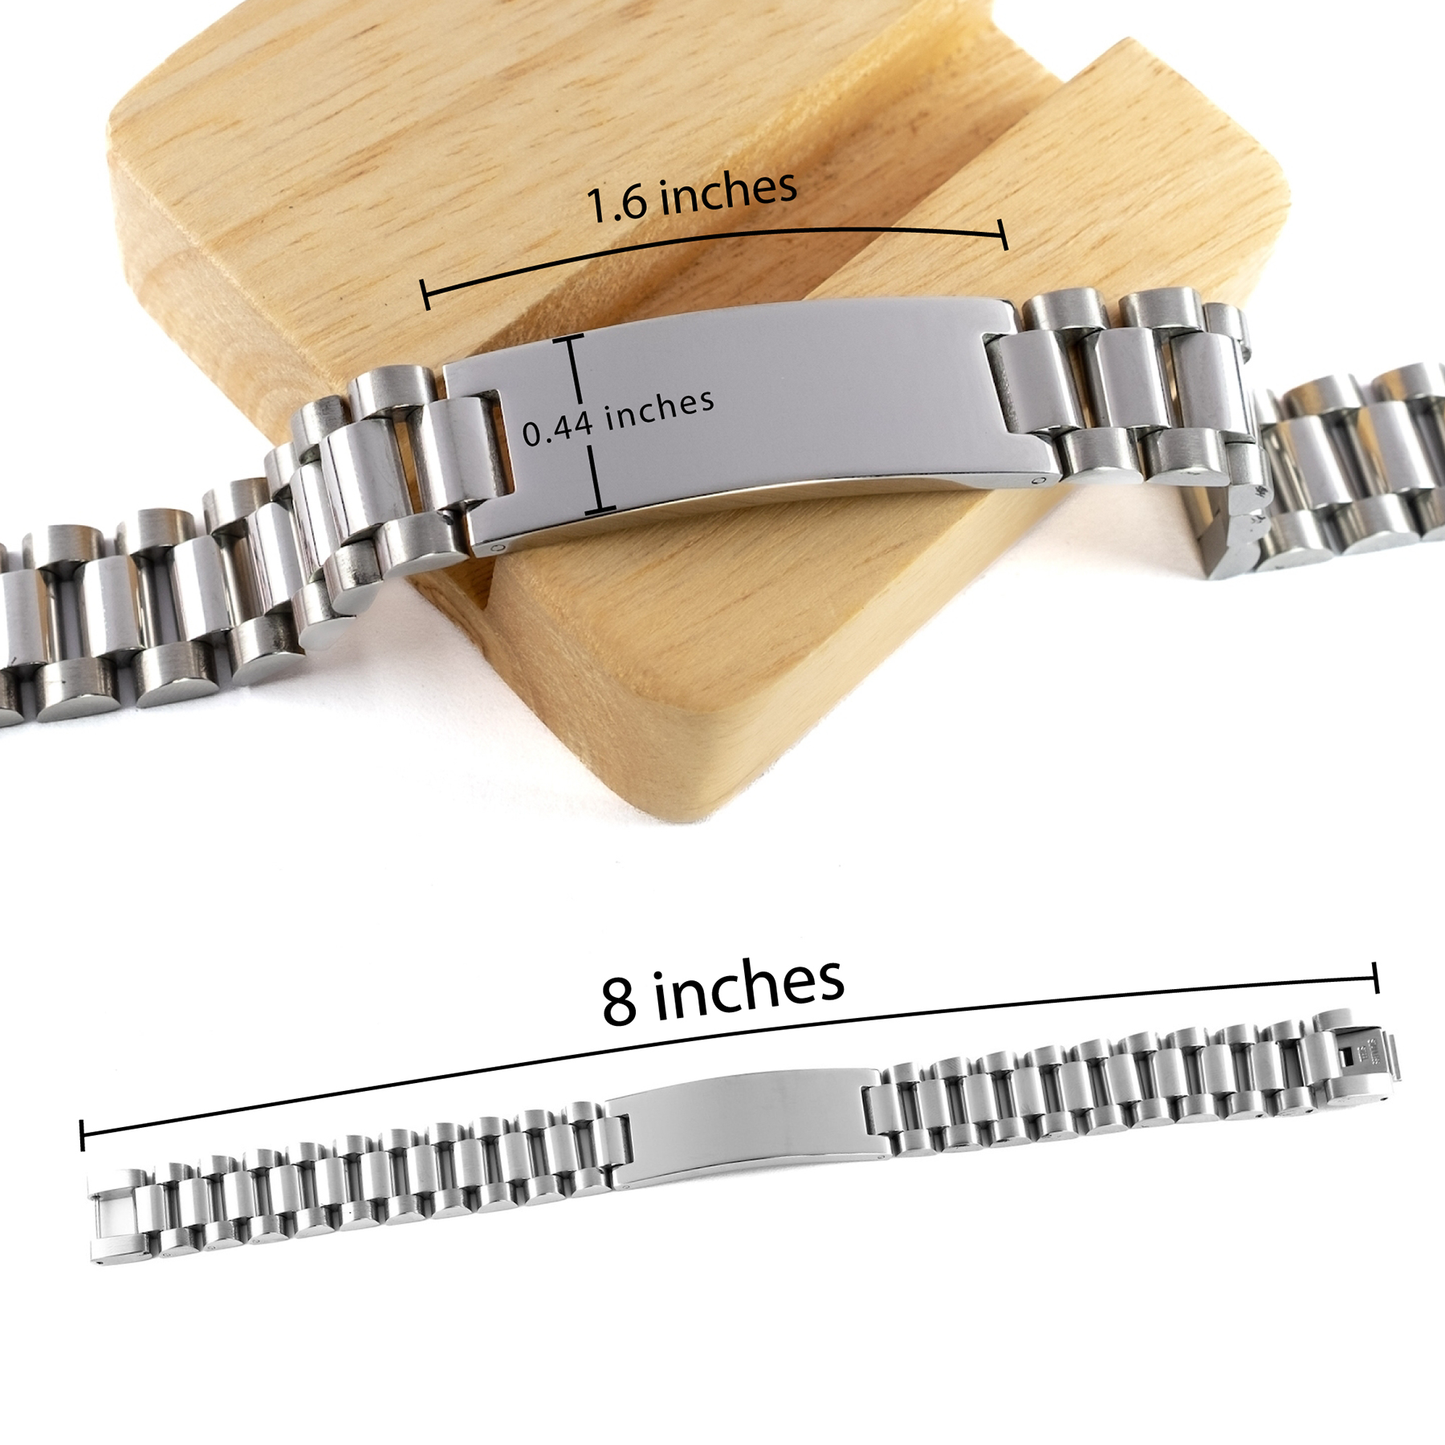 Granny Stainless Steel Bracelet - A Special Place in My Heart - Engraved Gift for Grandma on Birthday, Christmas, Easter, Holidays - Unique Jewelry for Confidence and Inspiration